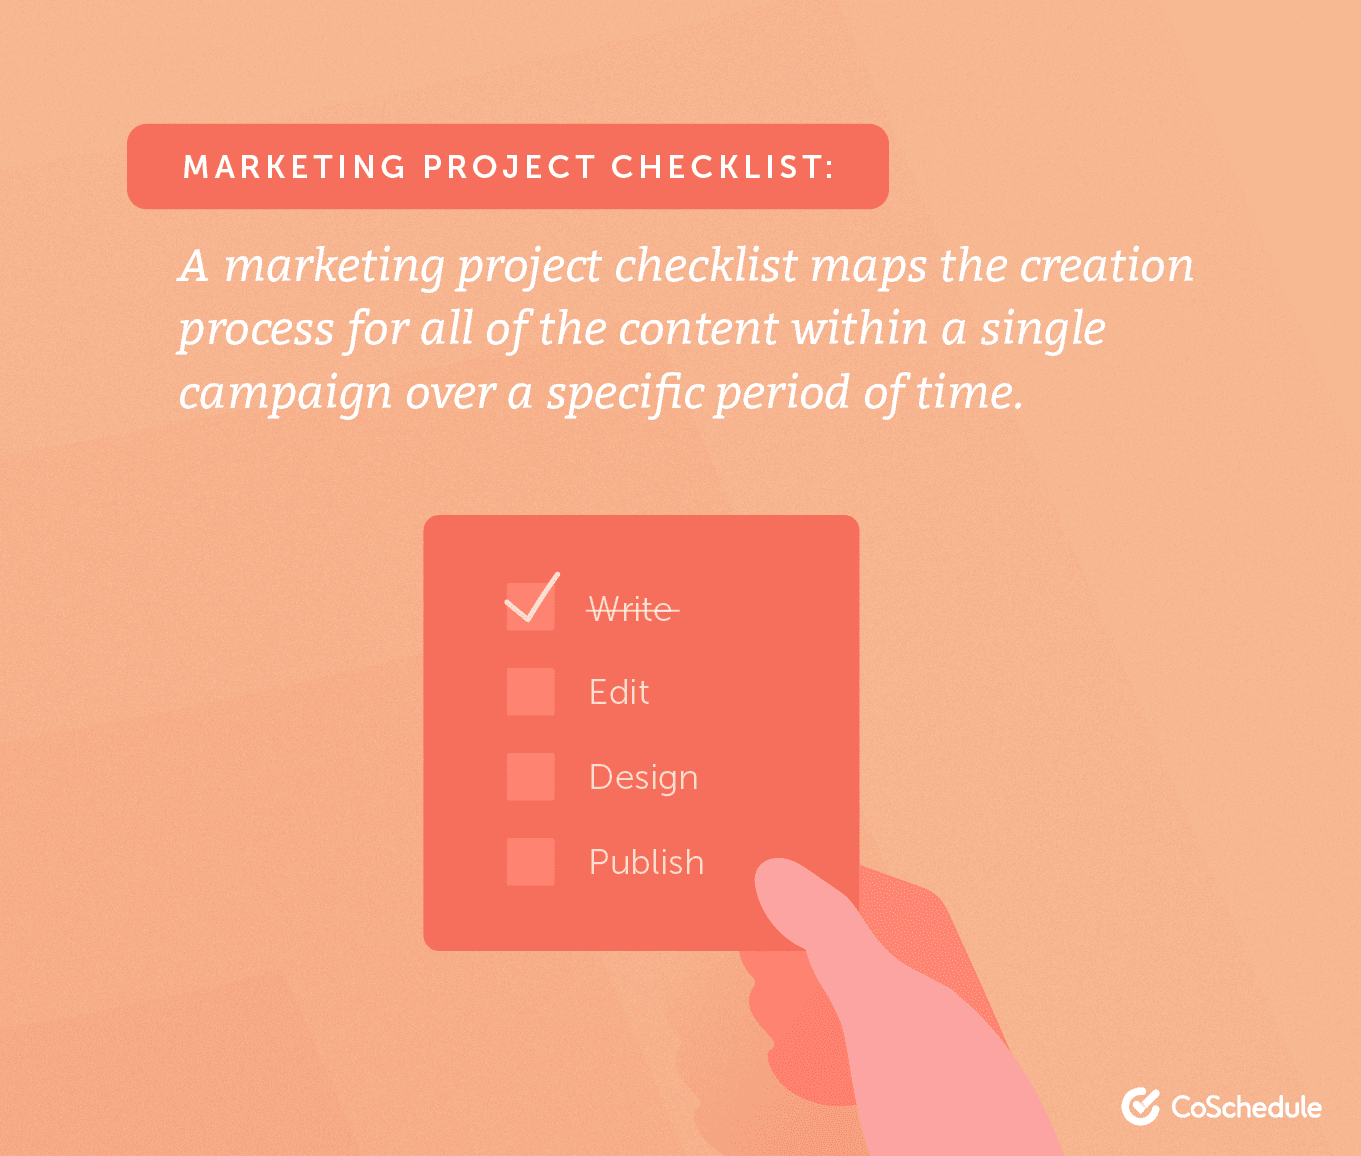 What is a marketing project checklist?